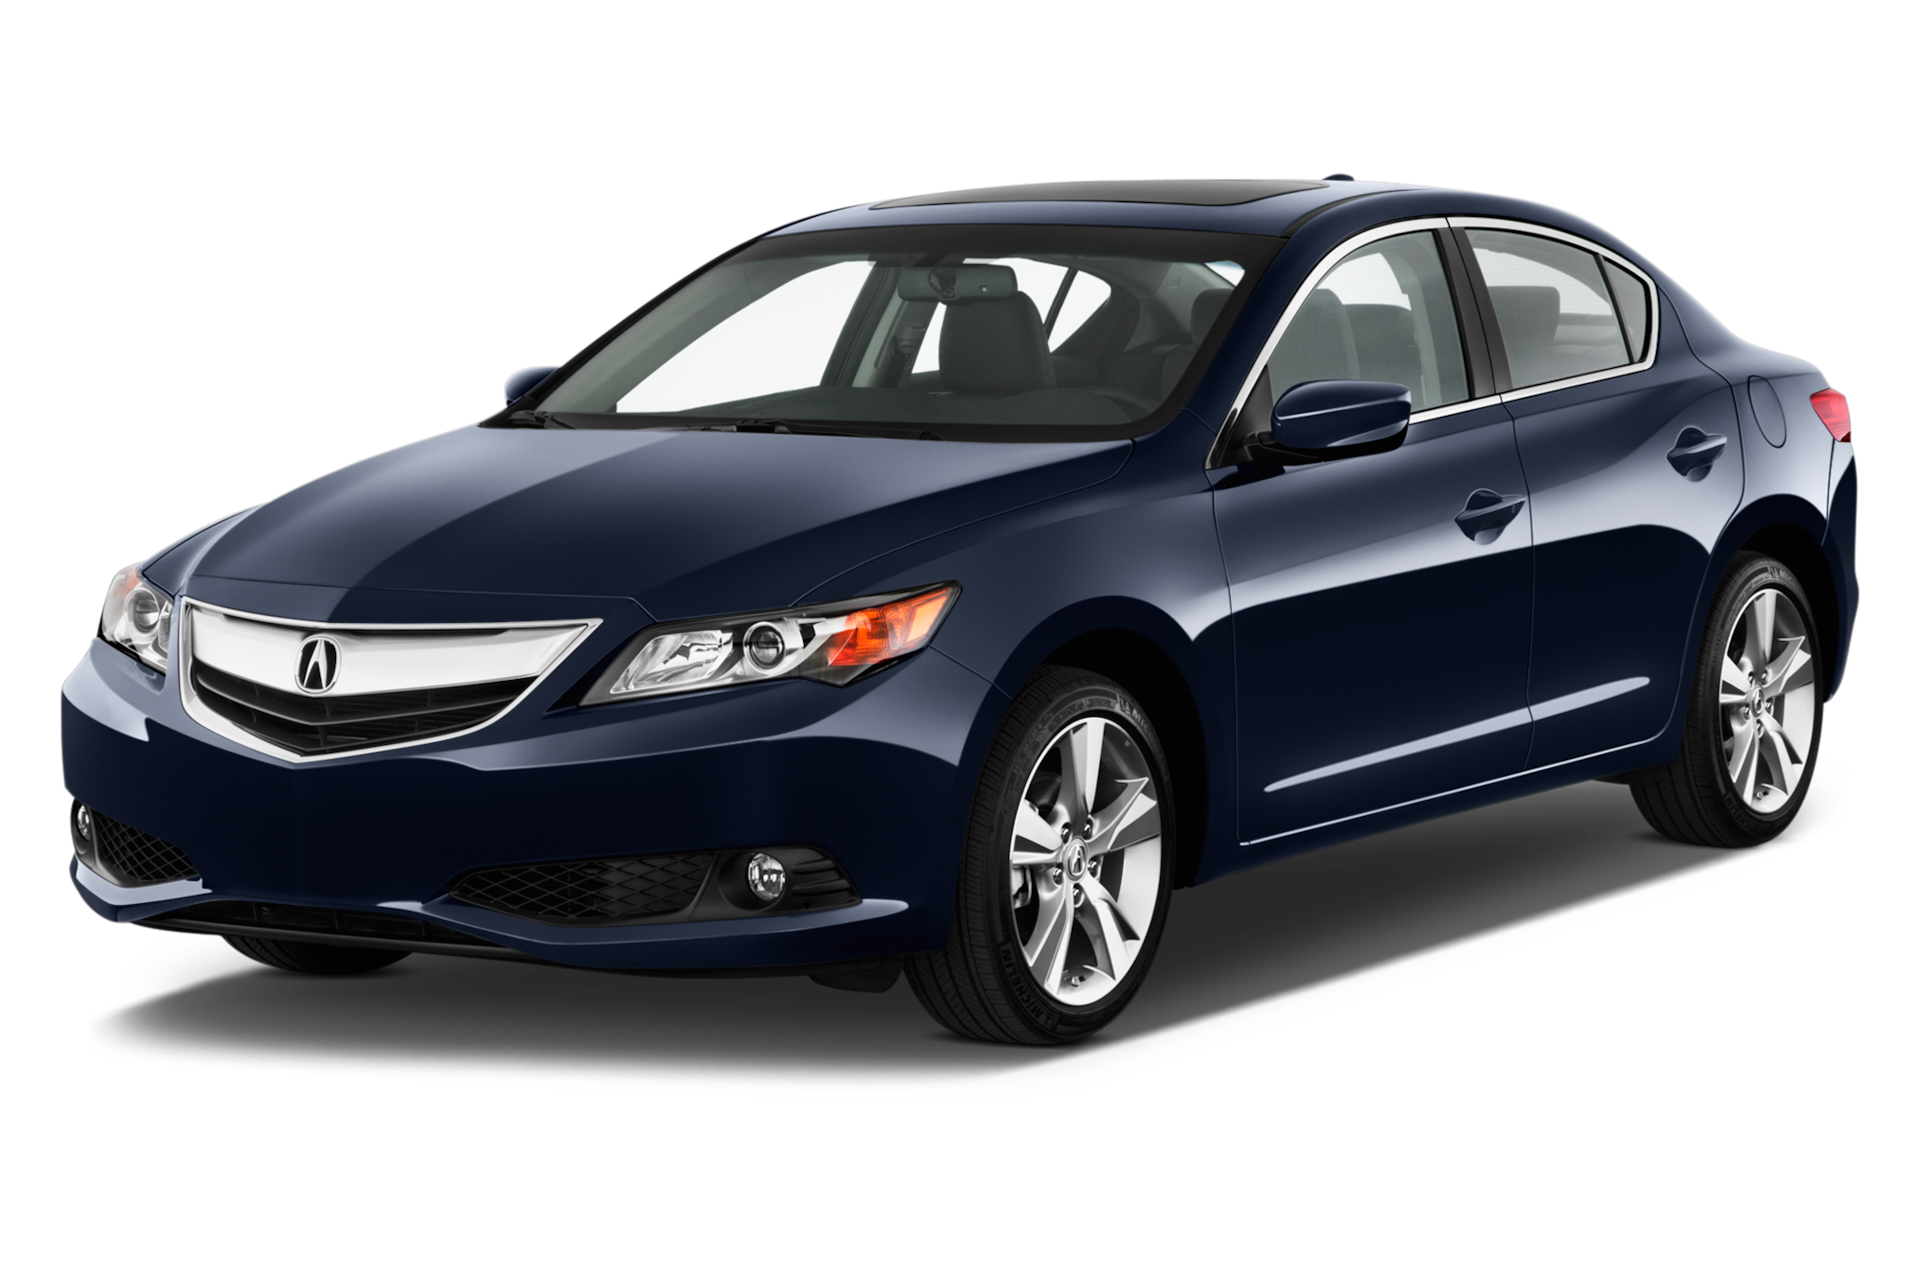 2014 Acura ILX Prices, Reviews, and Photos - MotorTrend